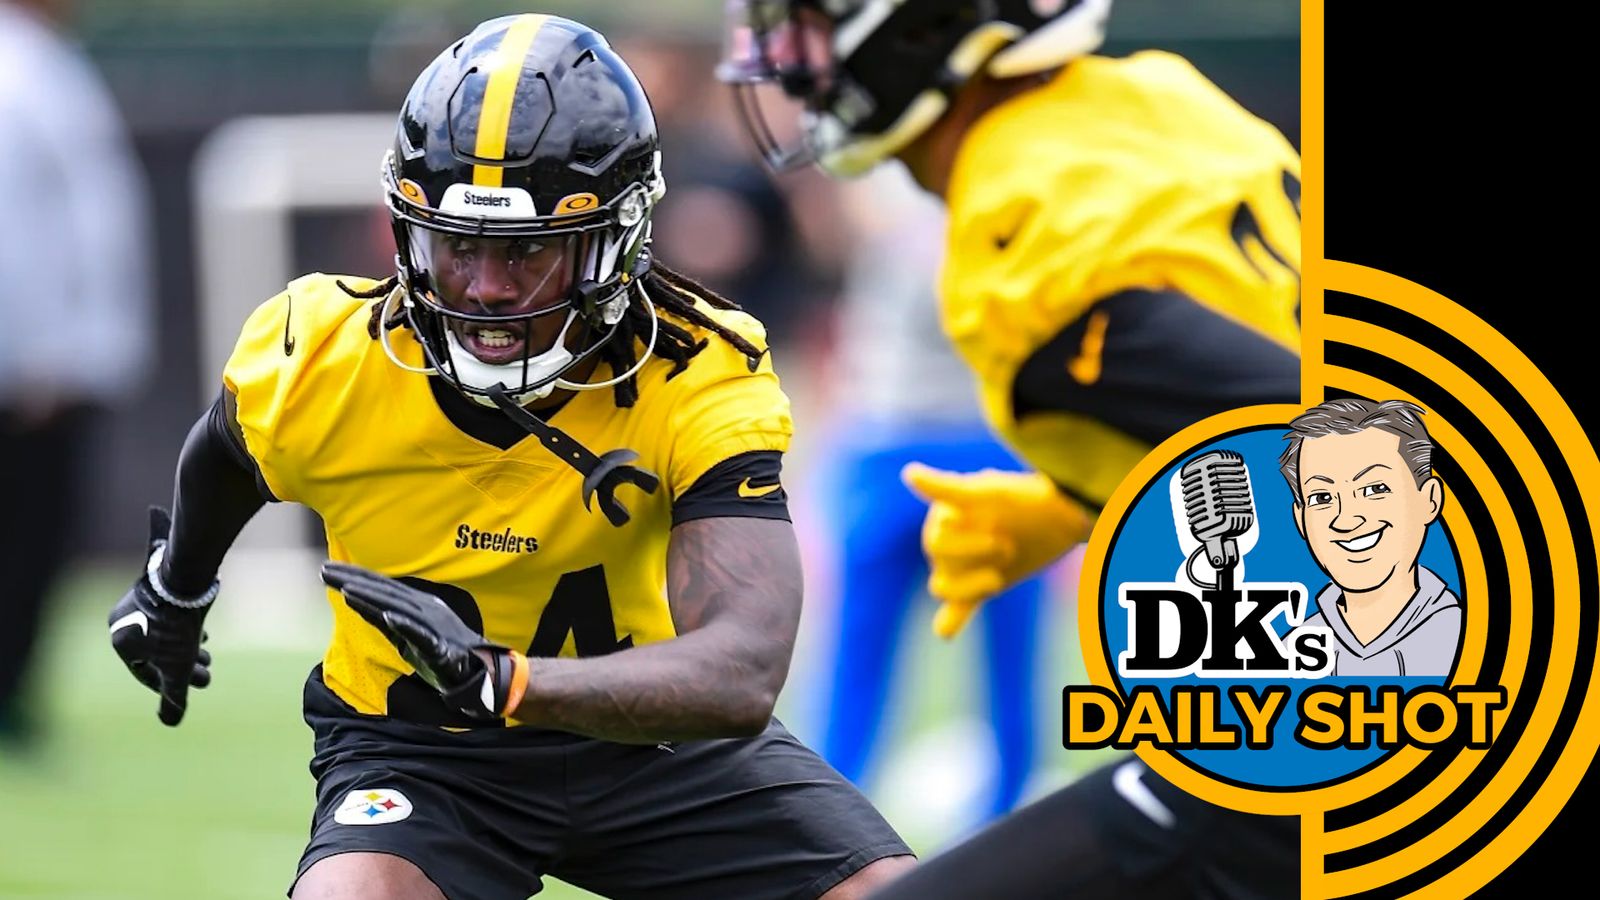 DK's Daily Shot of Steelers: The safe route?